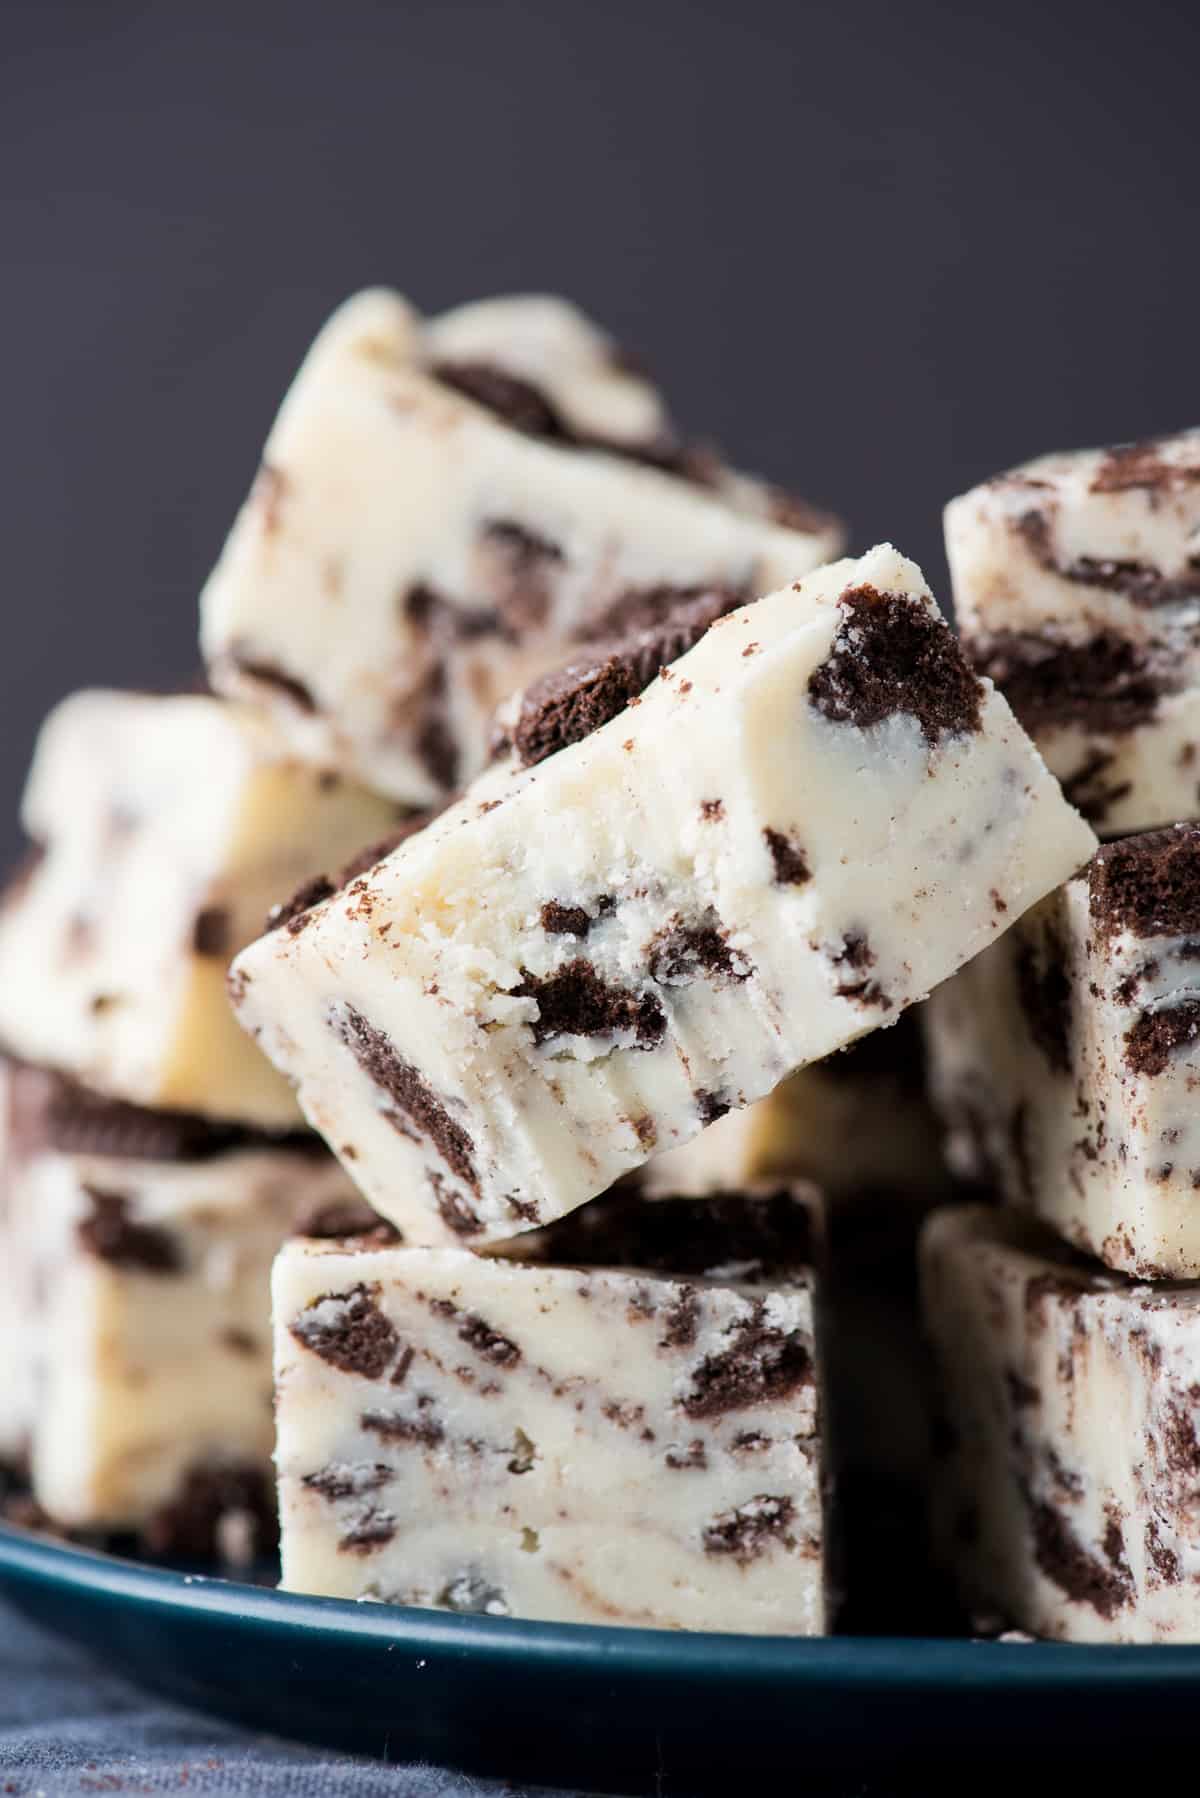 oreo fudge cut into squares and stacked on top of each other on dark background